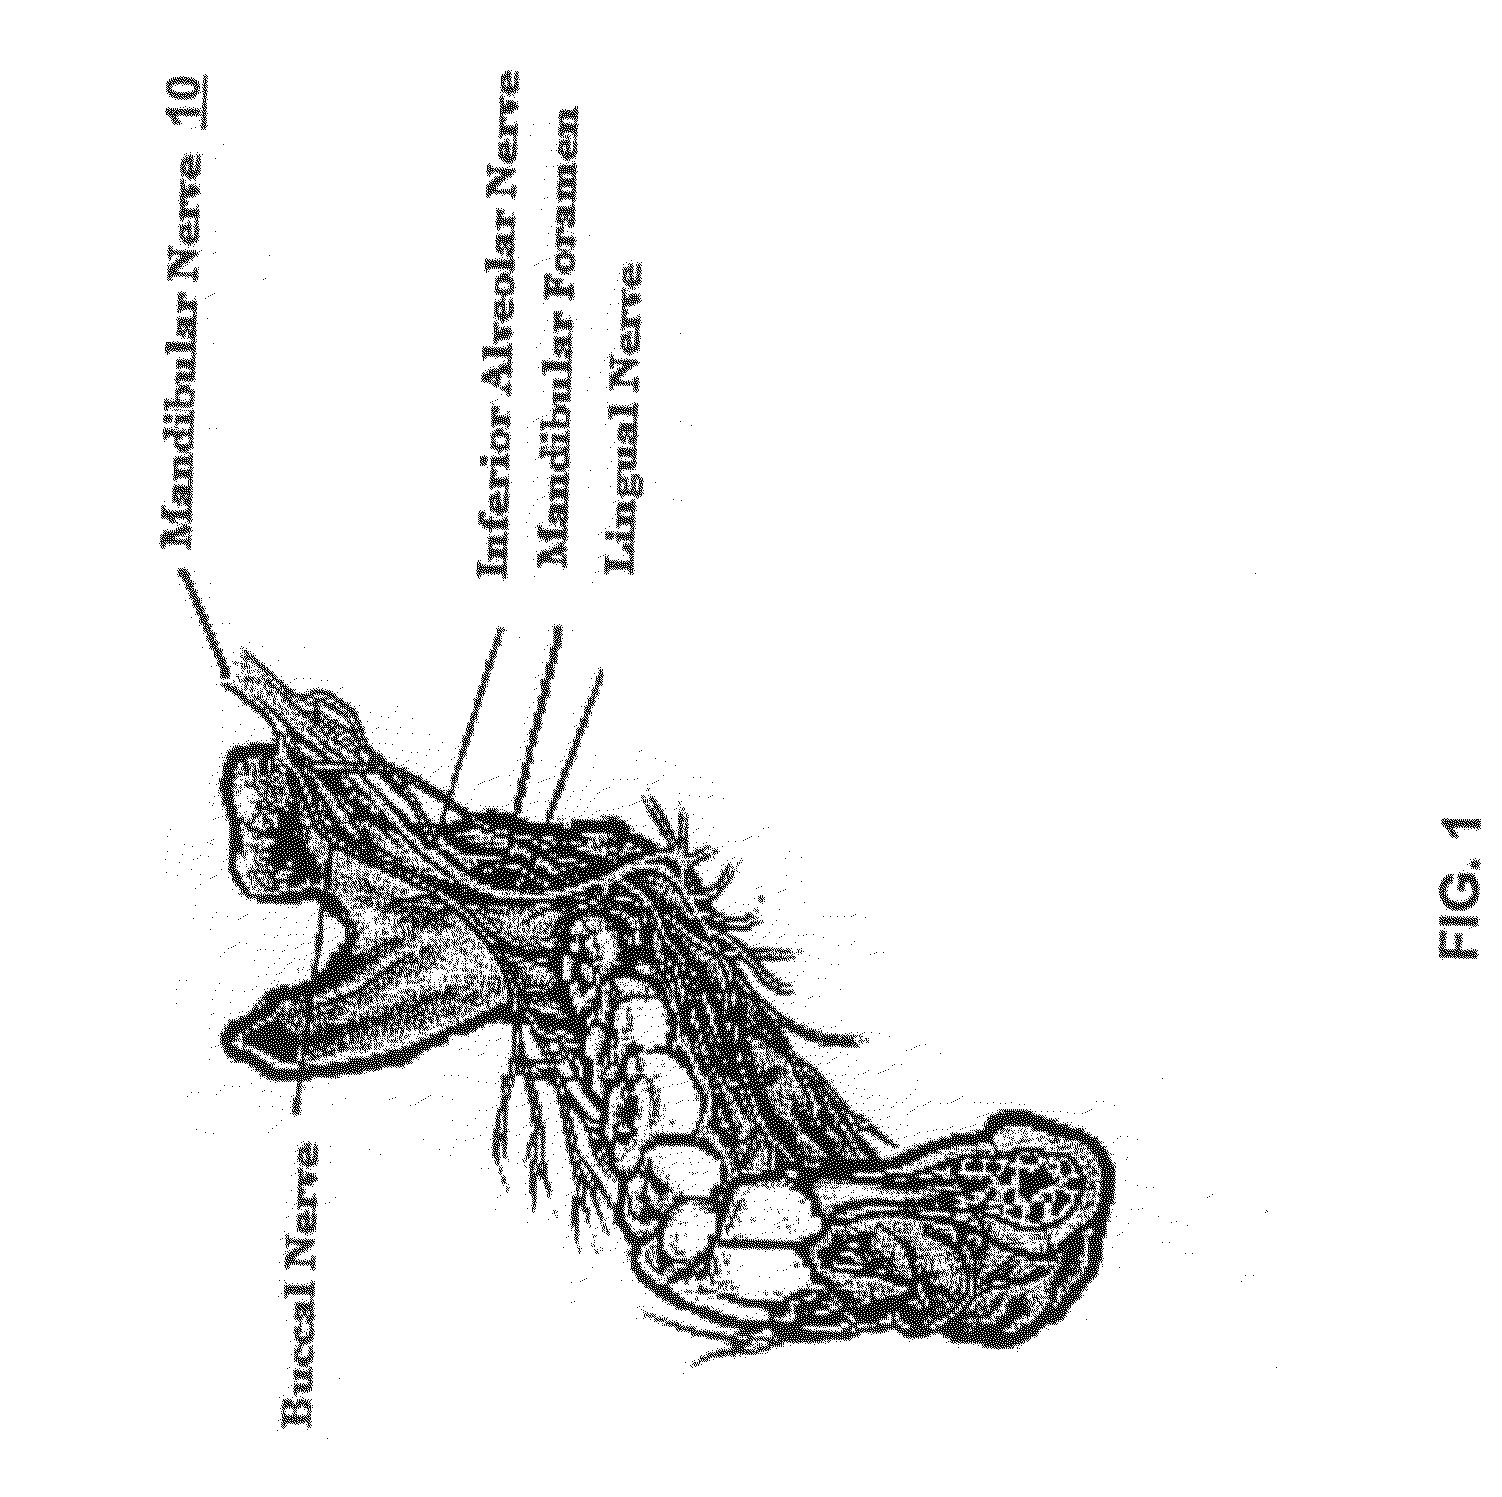 System and method for dental education simulation